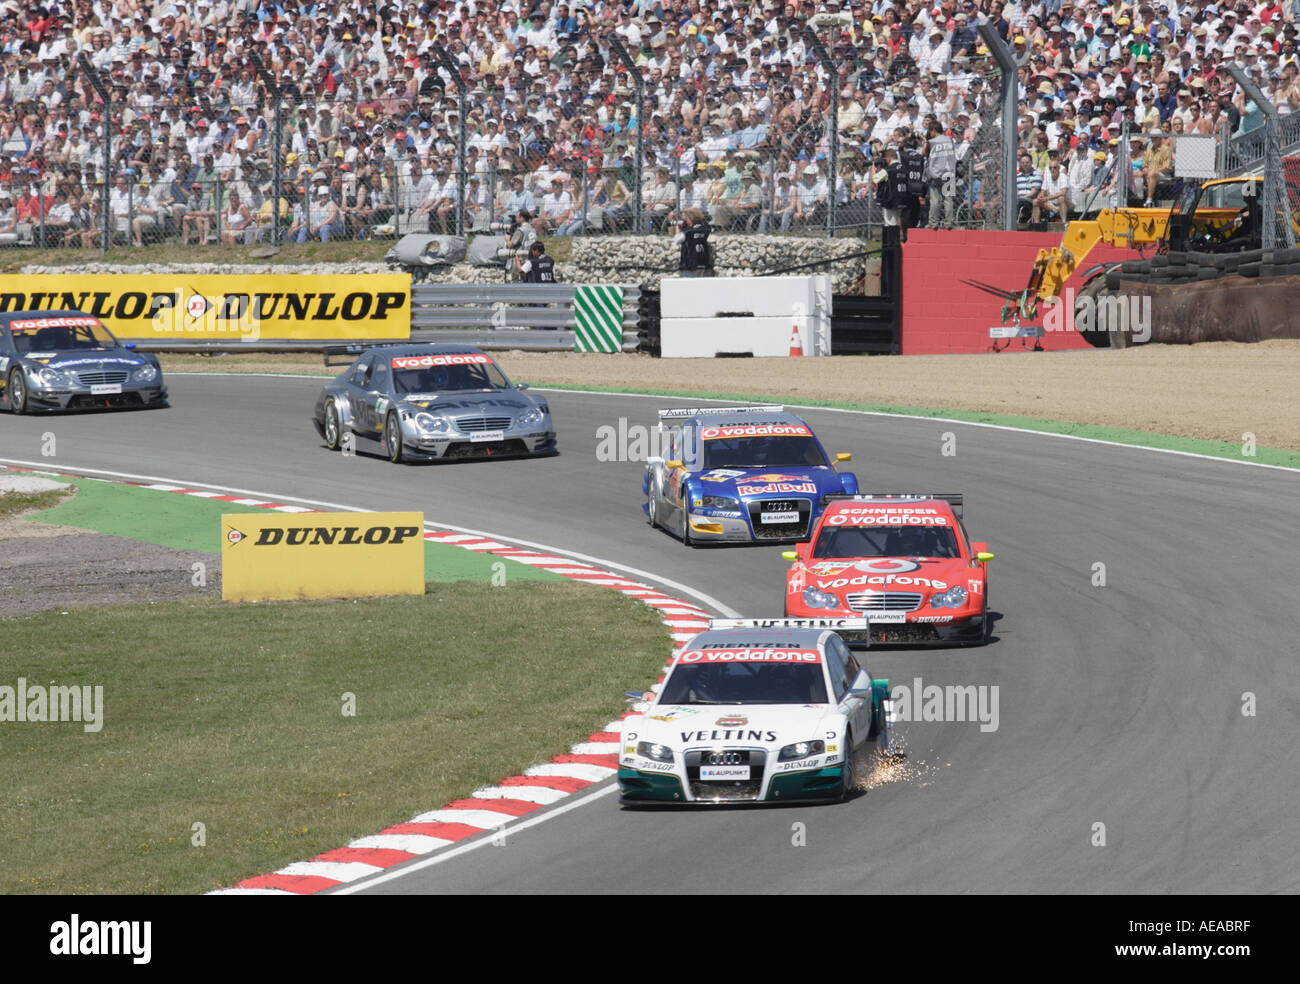 Heinz Harald Frentzen Driving An Audi A4 Dtm 2006 Throws Up Sparks Stock Photo Alamy